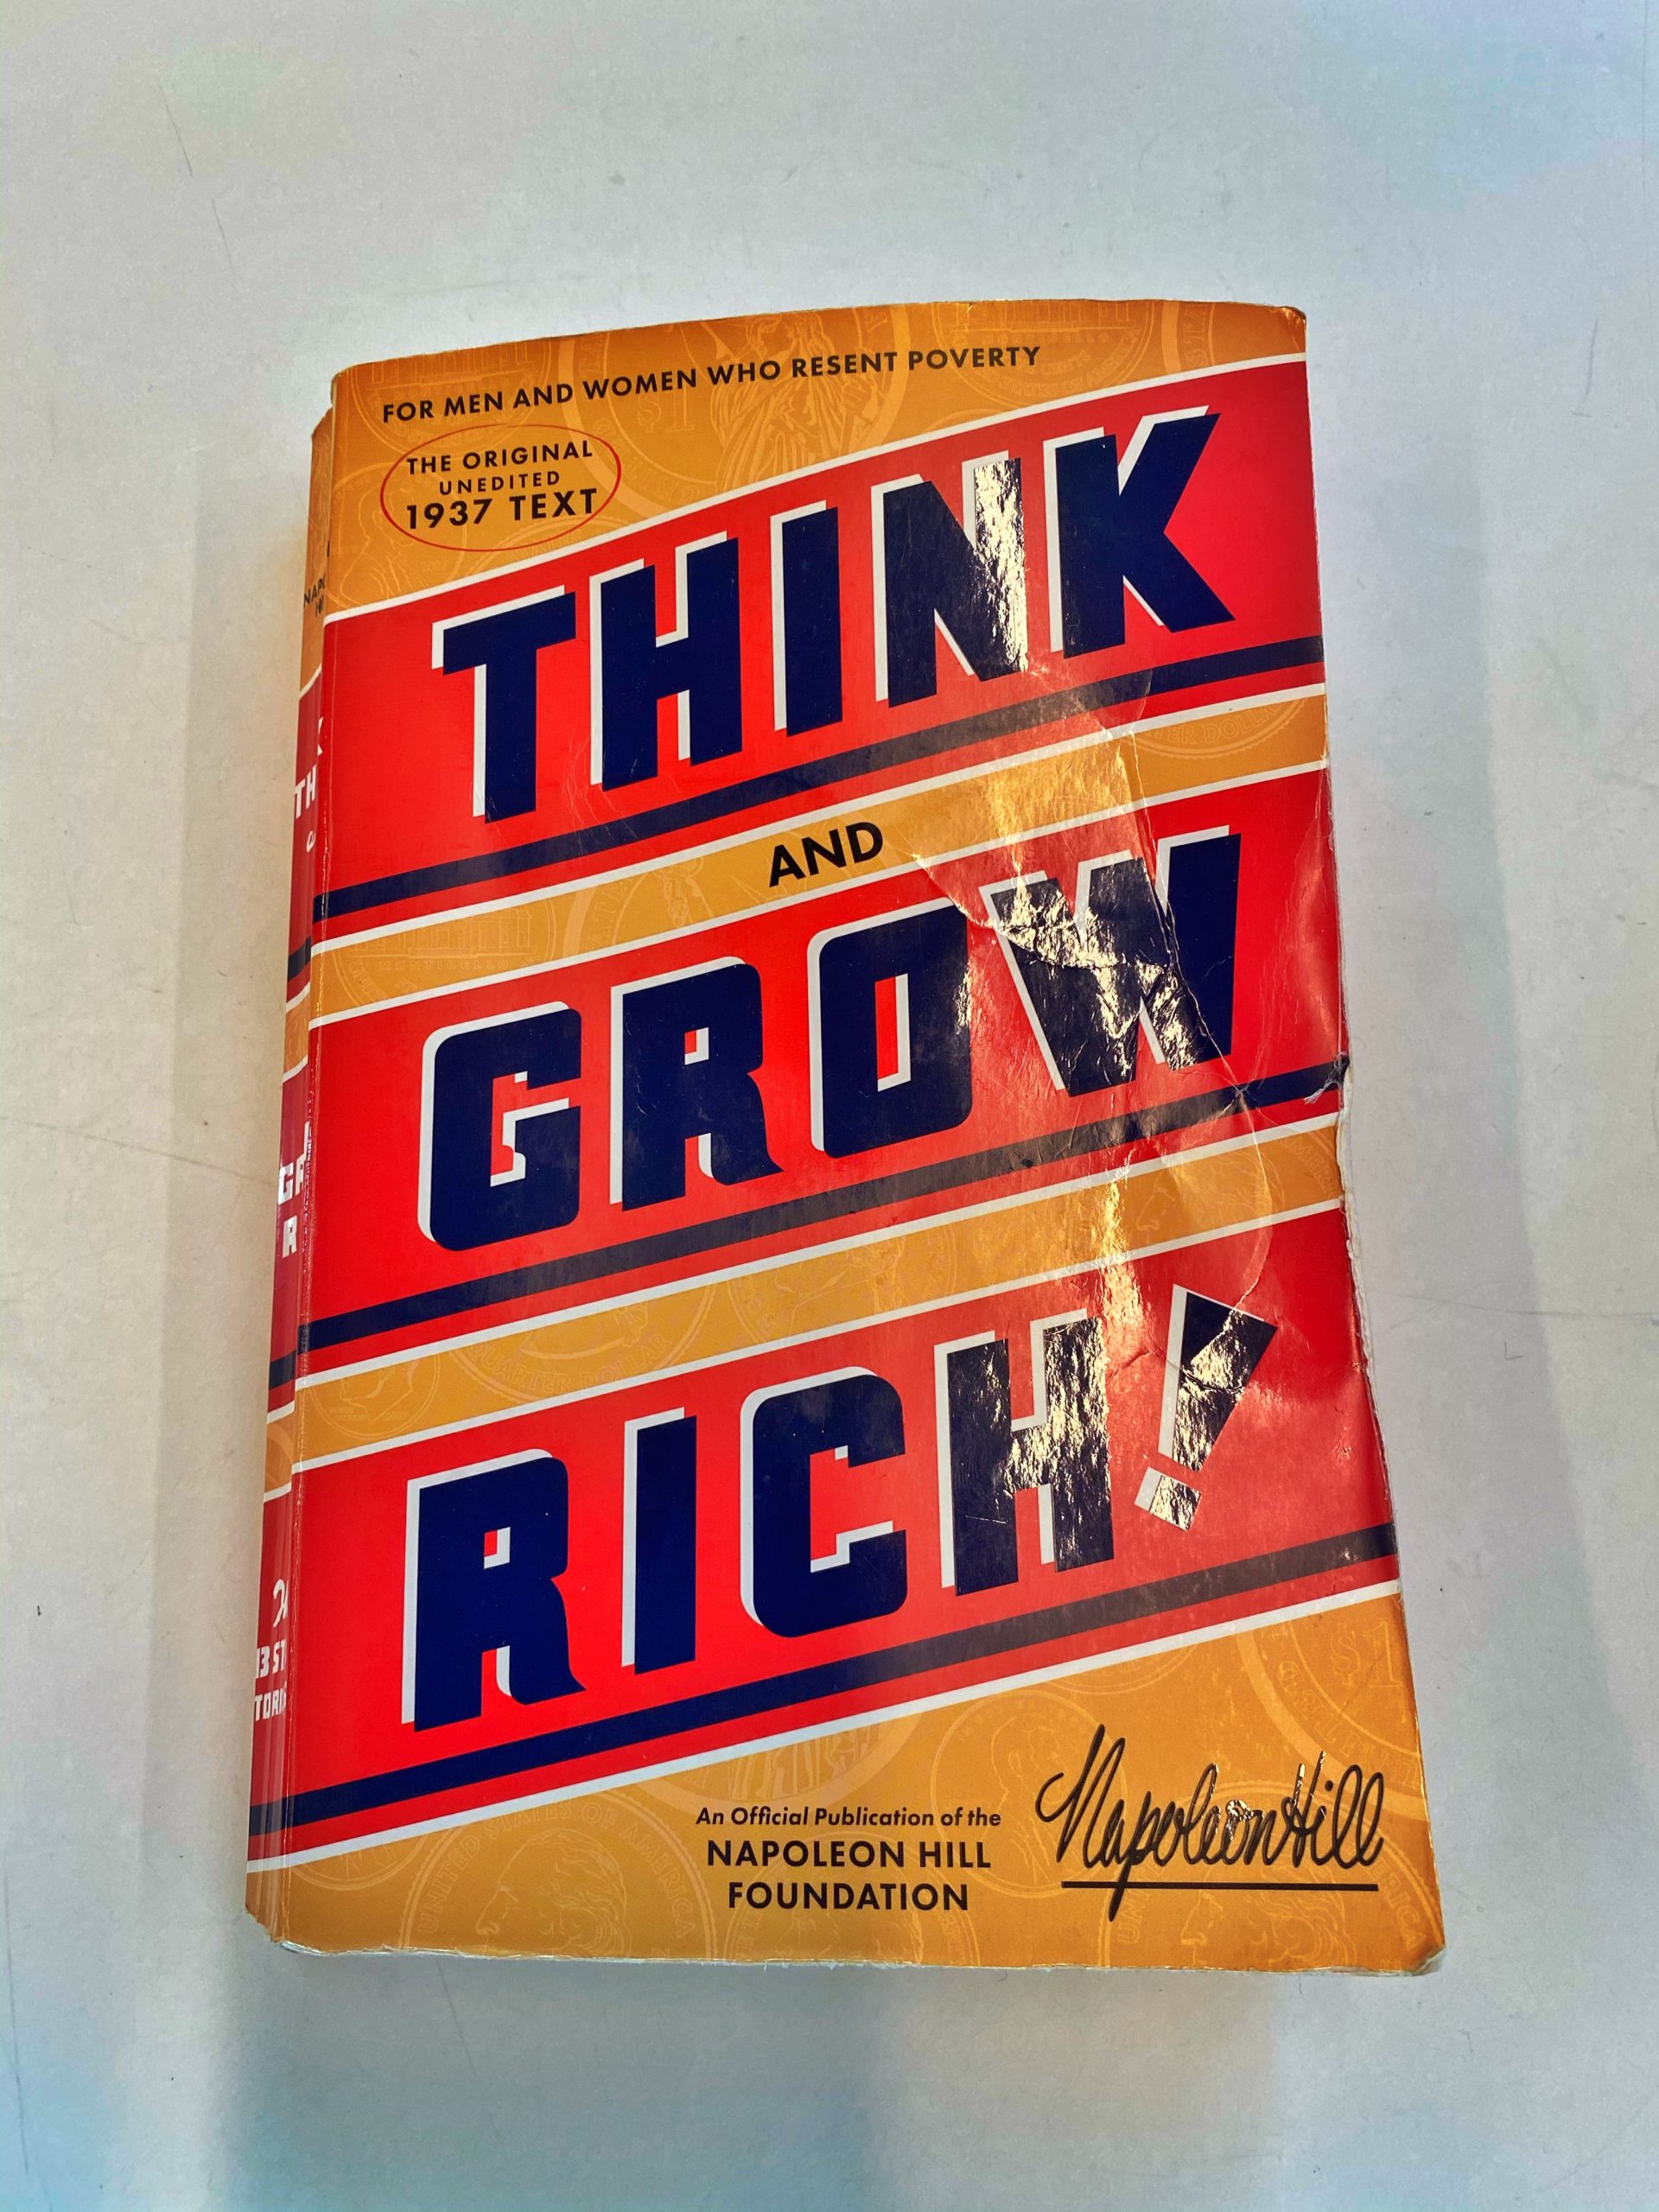 Book Review “Think And Grow Rich” by Napoleon Hill